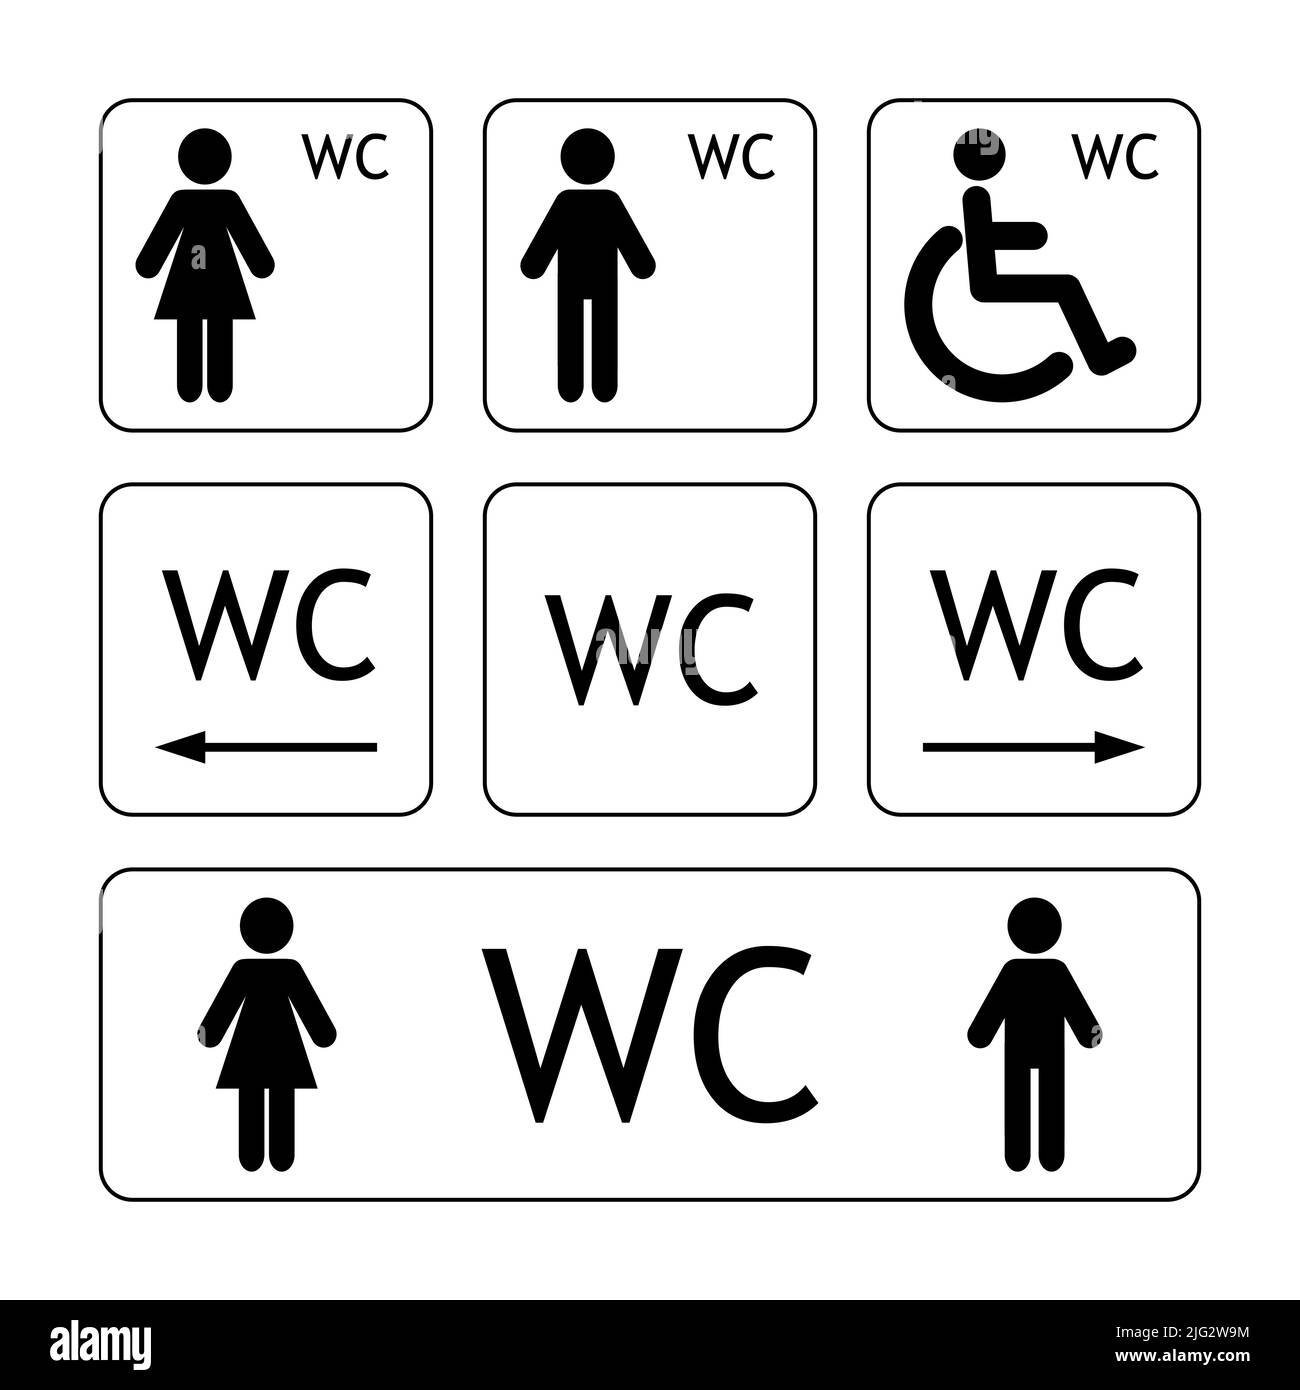 WC sign for restroom. WC toilet sign vector Stock Vector